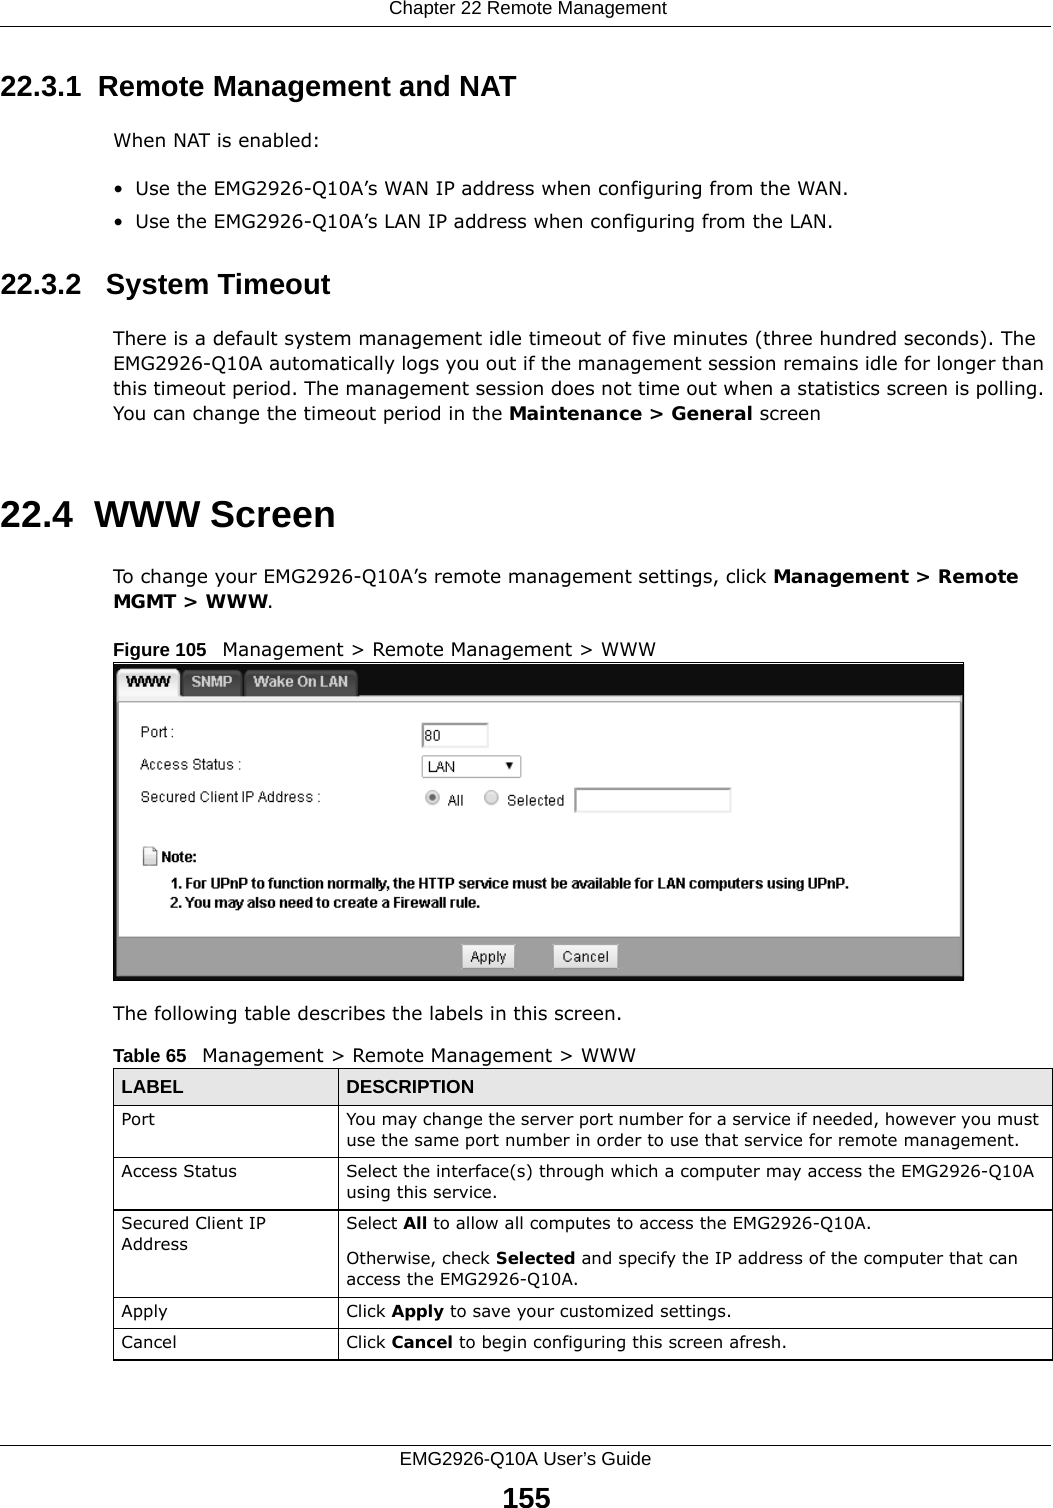  Chapter 22 Remote ManagementEMG2926-Q10A User’s Guide15522.3.1  Remote Management and NATWhen NAT is enabled:• Use the EMG2926-Q10A’s WAN IP address when configuring from the WAN. • Use the EMG2926-Q10A’s LAN IP address when configuring from the LAN.22.3.2   System TimeoutThere is a default system management idle timeout of five minutes (three hundred seconds). The EMG2926-Q10A automatically logs you out if the management session remains idle for longer than this timeout period. The management session does not time out when a statistics screen is polling. You can change the timeout period in the Maintenance &gt; General screen22.4  WWW Screen    To change your EMG2926-Q10A’s remote management settings, click Management &gt; Remote MGMT &gt; WWW.Figure 105   Management &gt; Remote Management &gt; WWW The following table describes the labels in this screen.Table 65   Management &gt; Remote Management &gt; WWWLABEL DESCRIPTIONPort You may change the server port number for a service if needed, however you must use the same port number in order to use that service for remote management.Access Status Select the interface(s) through which a computer may access the EMG2926-Q10A using this service.Secured Client IP AddressSelect All to allow all computes to access the EMG2926-Q10A.Otherwise, check Selected and specify the IP address of the computer that can access the EMG2926-Q10A.Apply Click Apply to save your customized settings. Cancel Click Cancel to begin configuring this screen afresh.